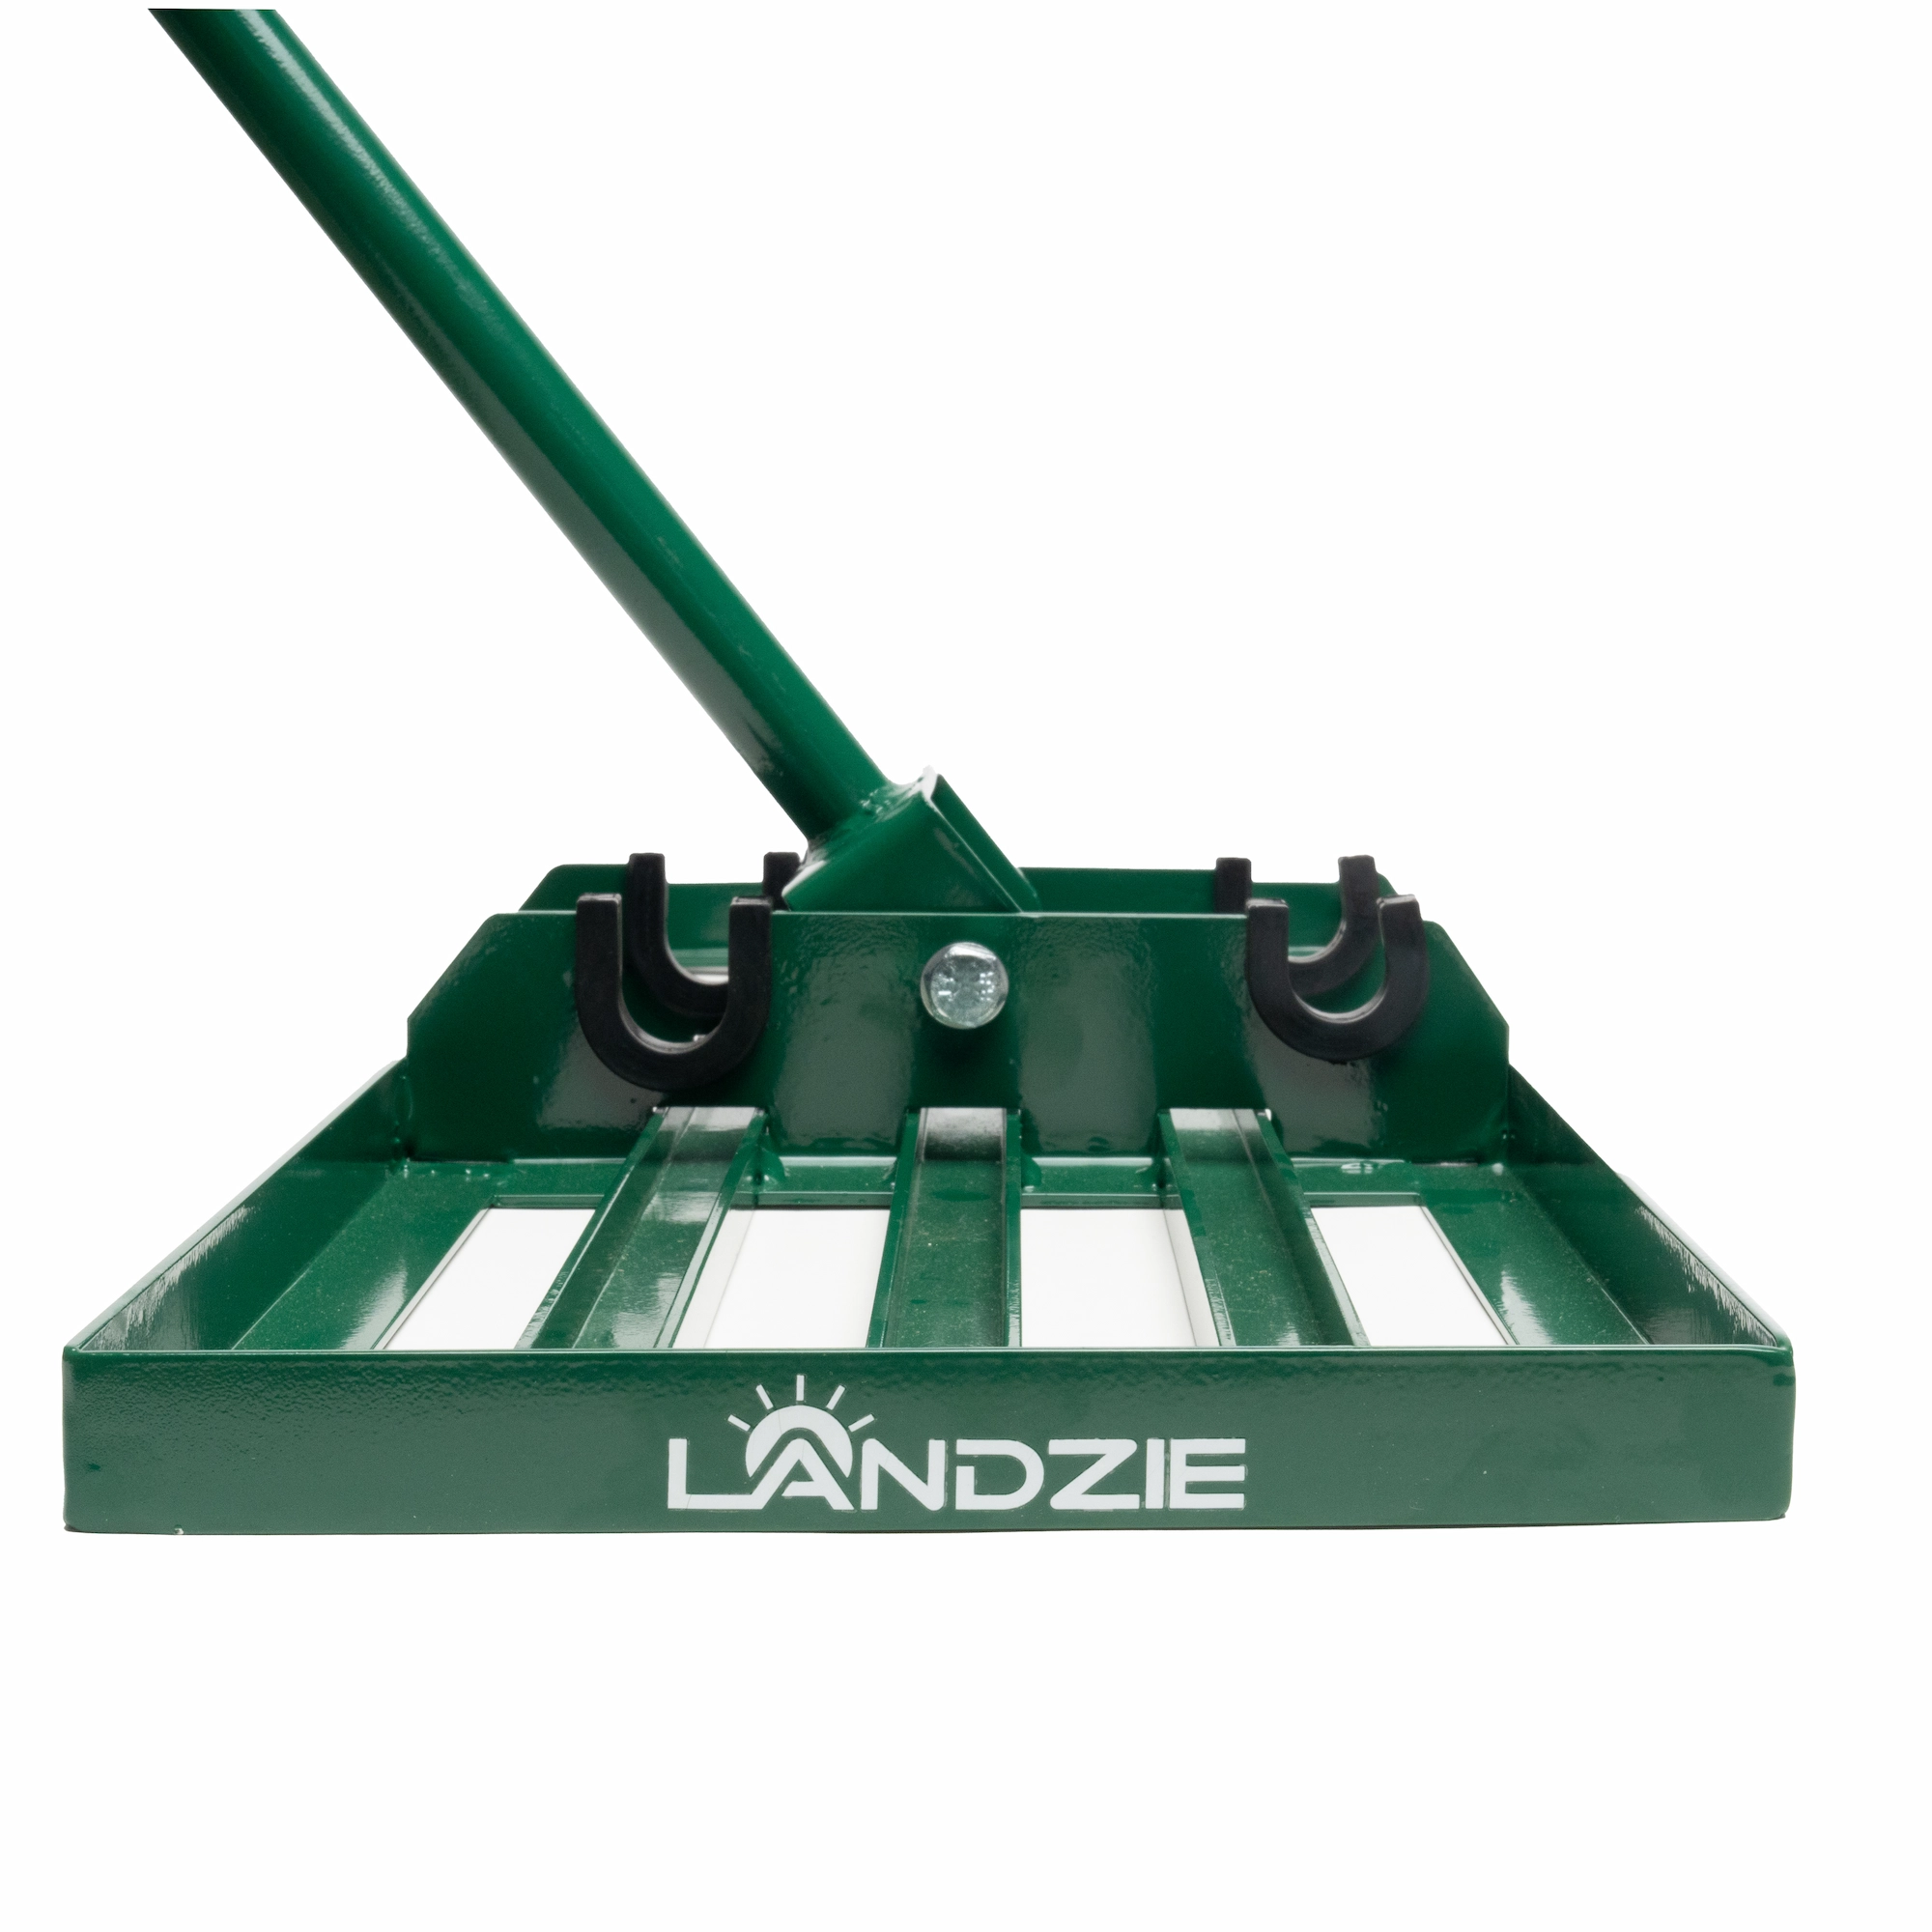 Landzie Lawn Leveling Rake - 36 Inch Wide 72 inch Handle Powder Coated Yard,  Garden, and Lawn Leveling Tool - Professional Lawn Care Landscaping Tools 